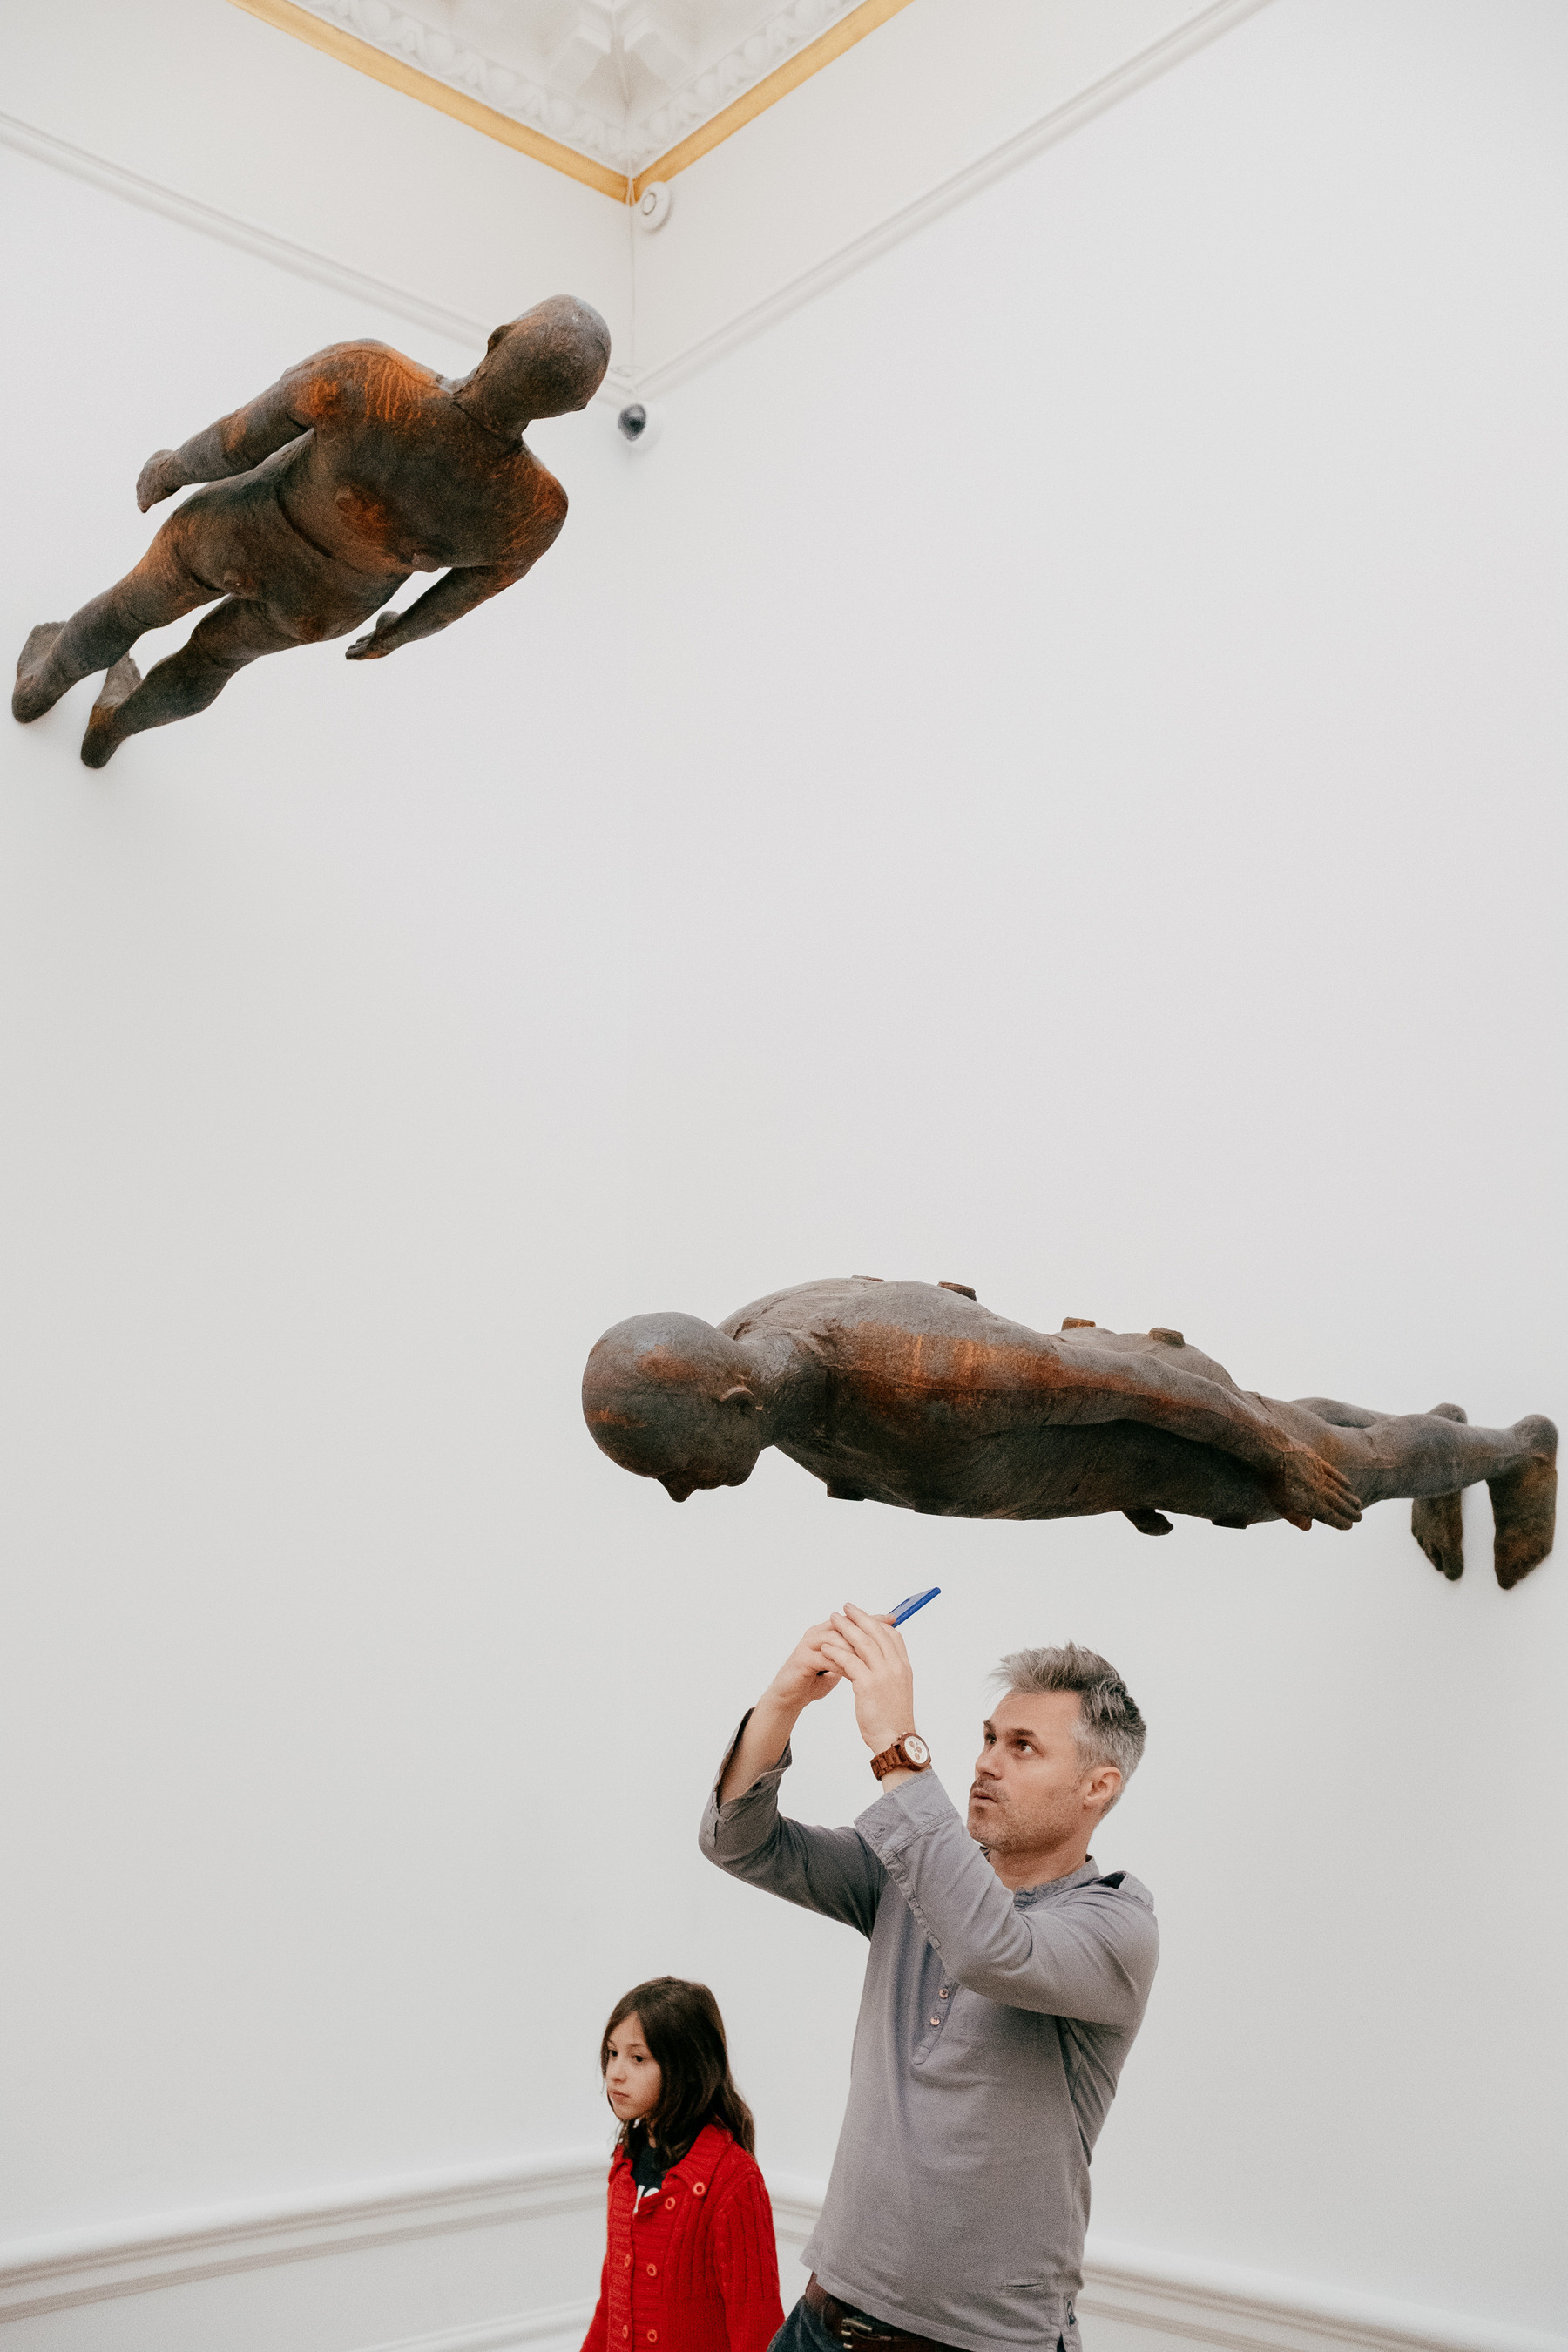 A man taking a photo of an Anthony Gormley sculpture of a man, that is affixed perpendicular to the gallery wall above his head. There is another sculpture of a man further up the adjacent wall and a young girl in a red dress is standing next to the man taking the photo.